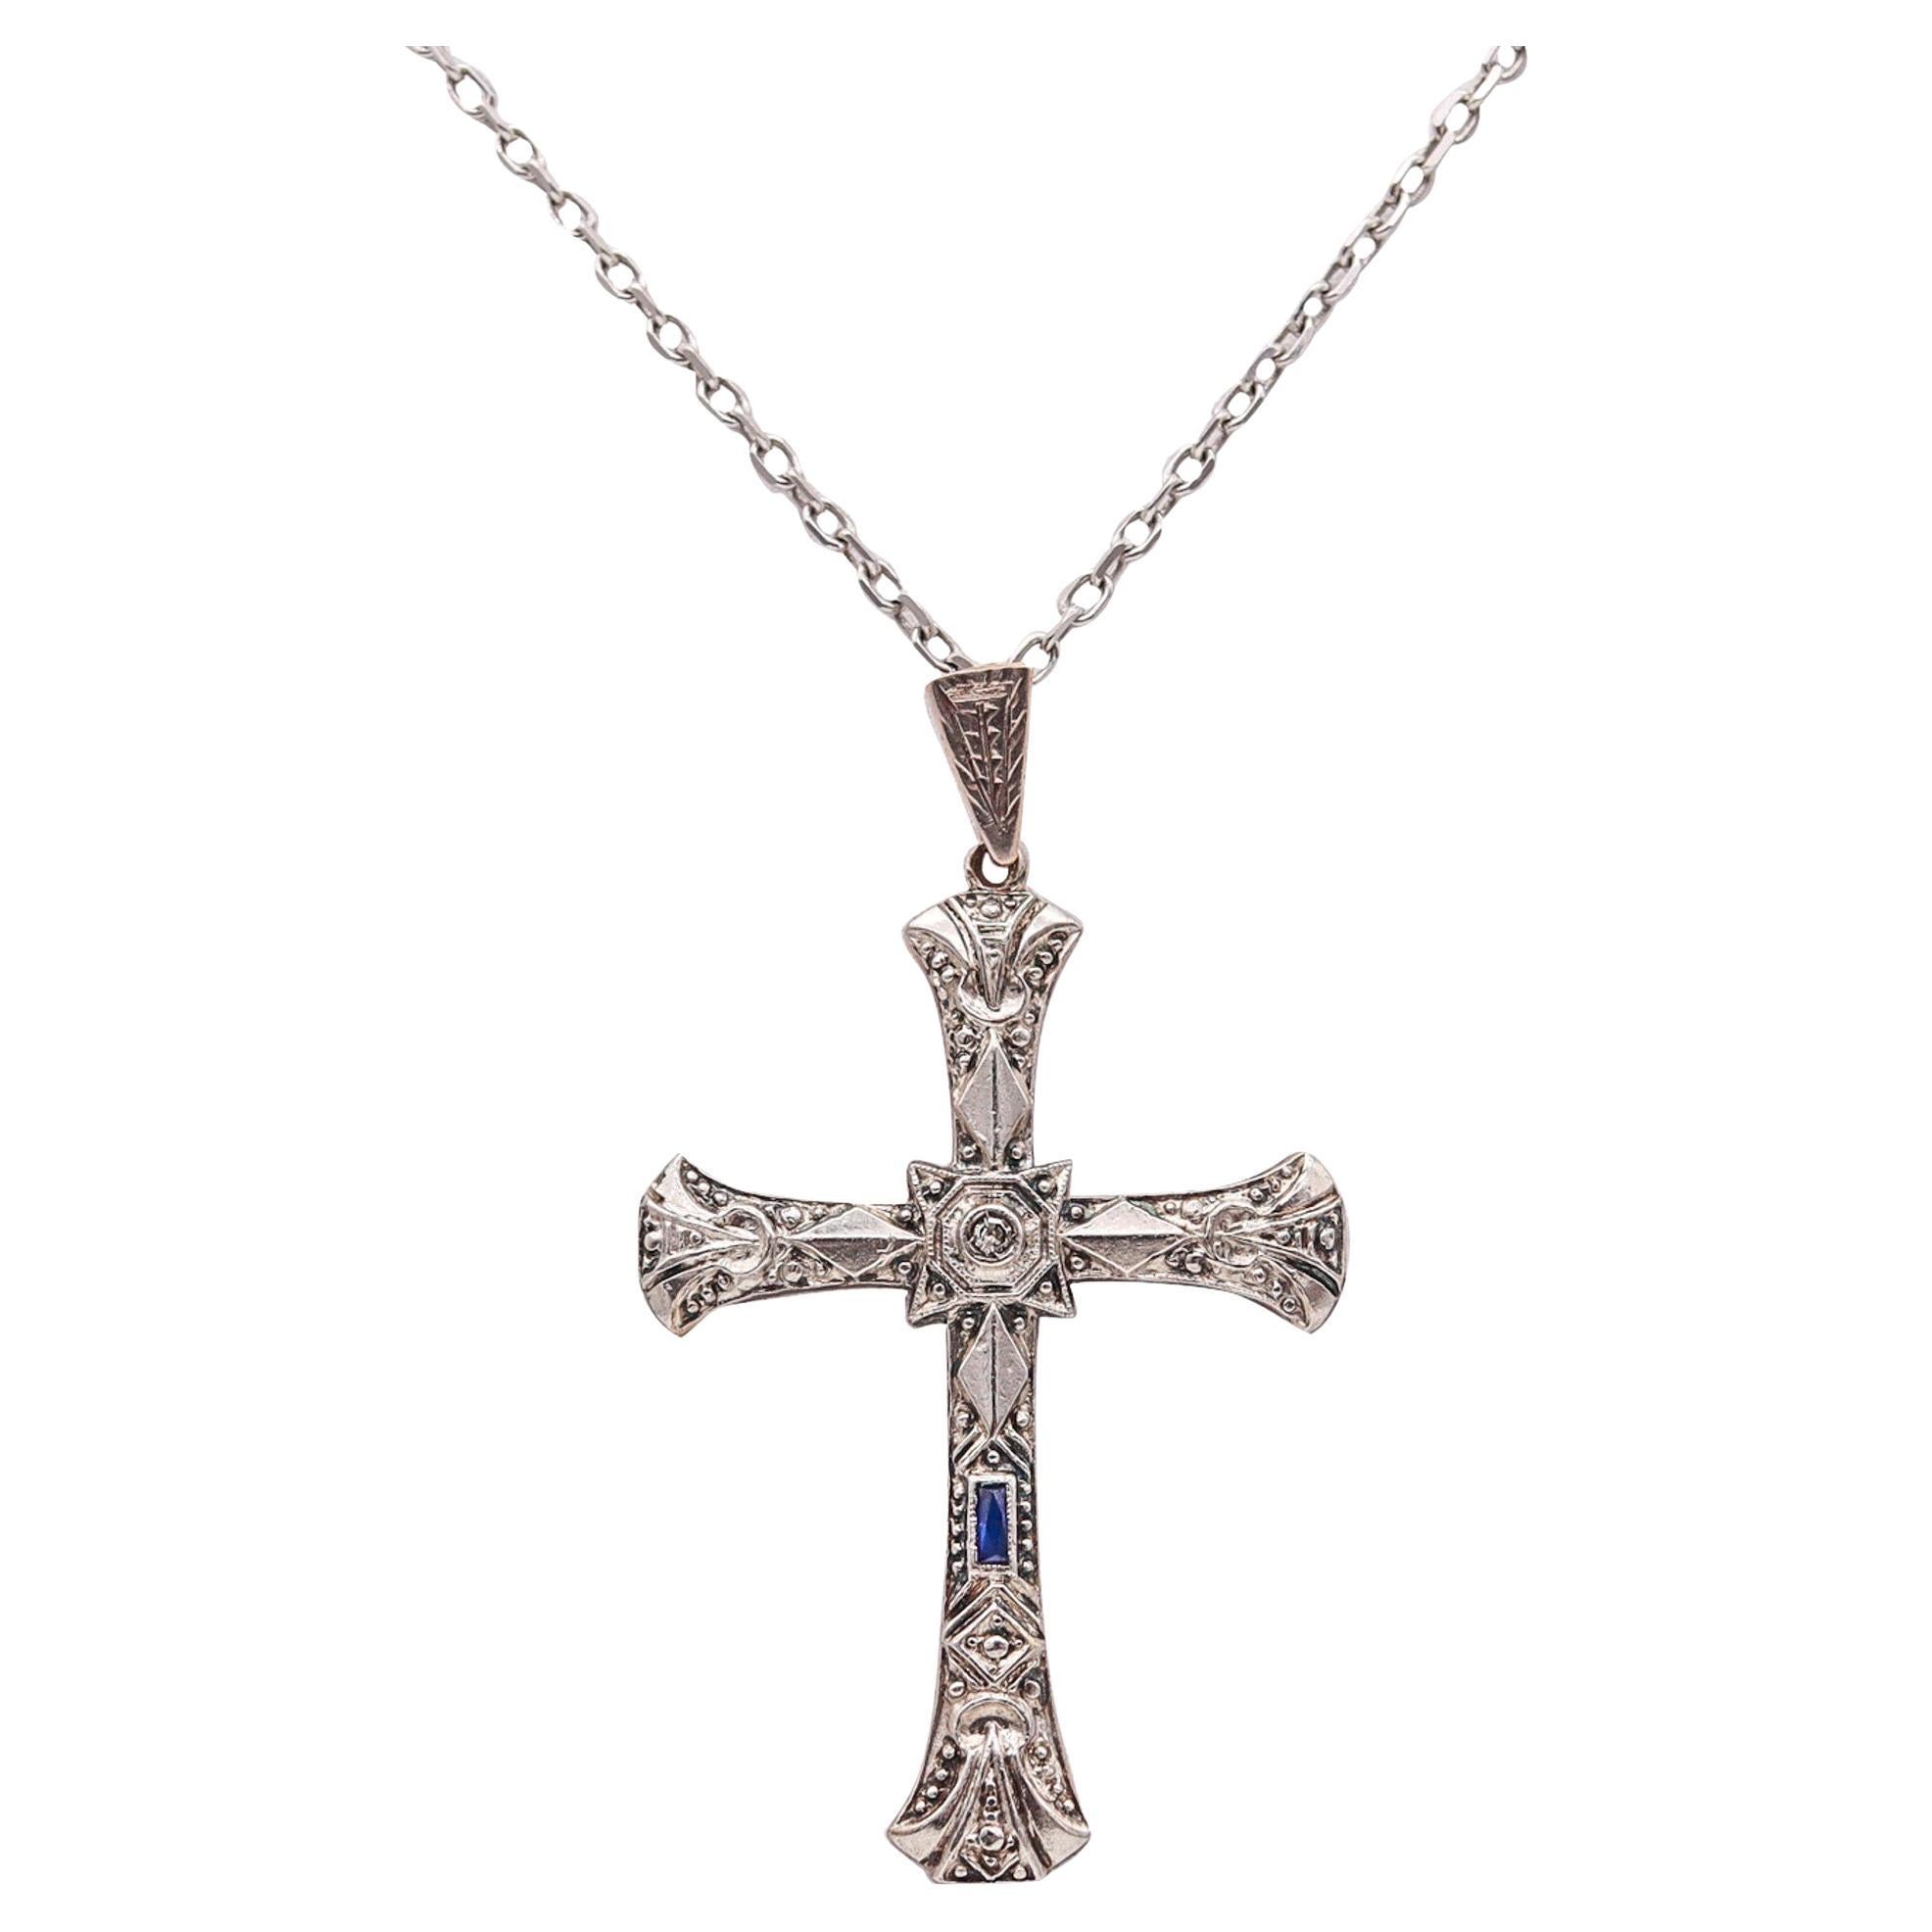 Edwardian 1905 Belle Epoque Cross In 18Kt Gold With Diamond and Sapphire